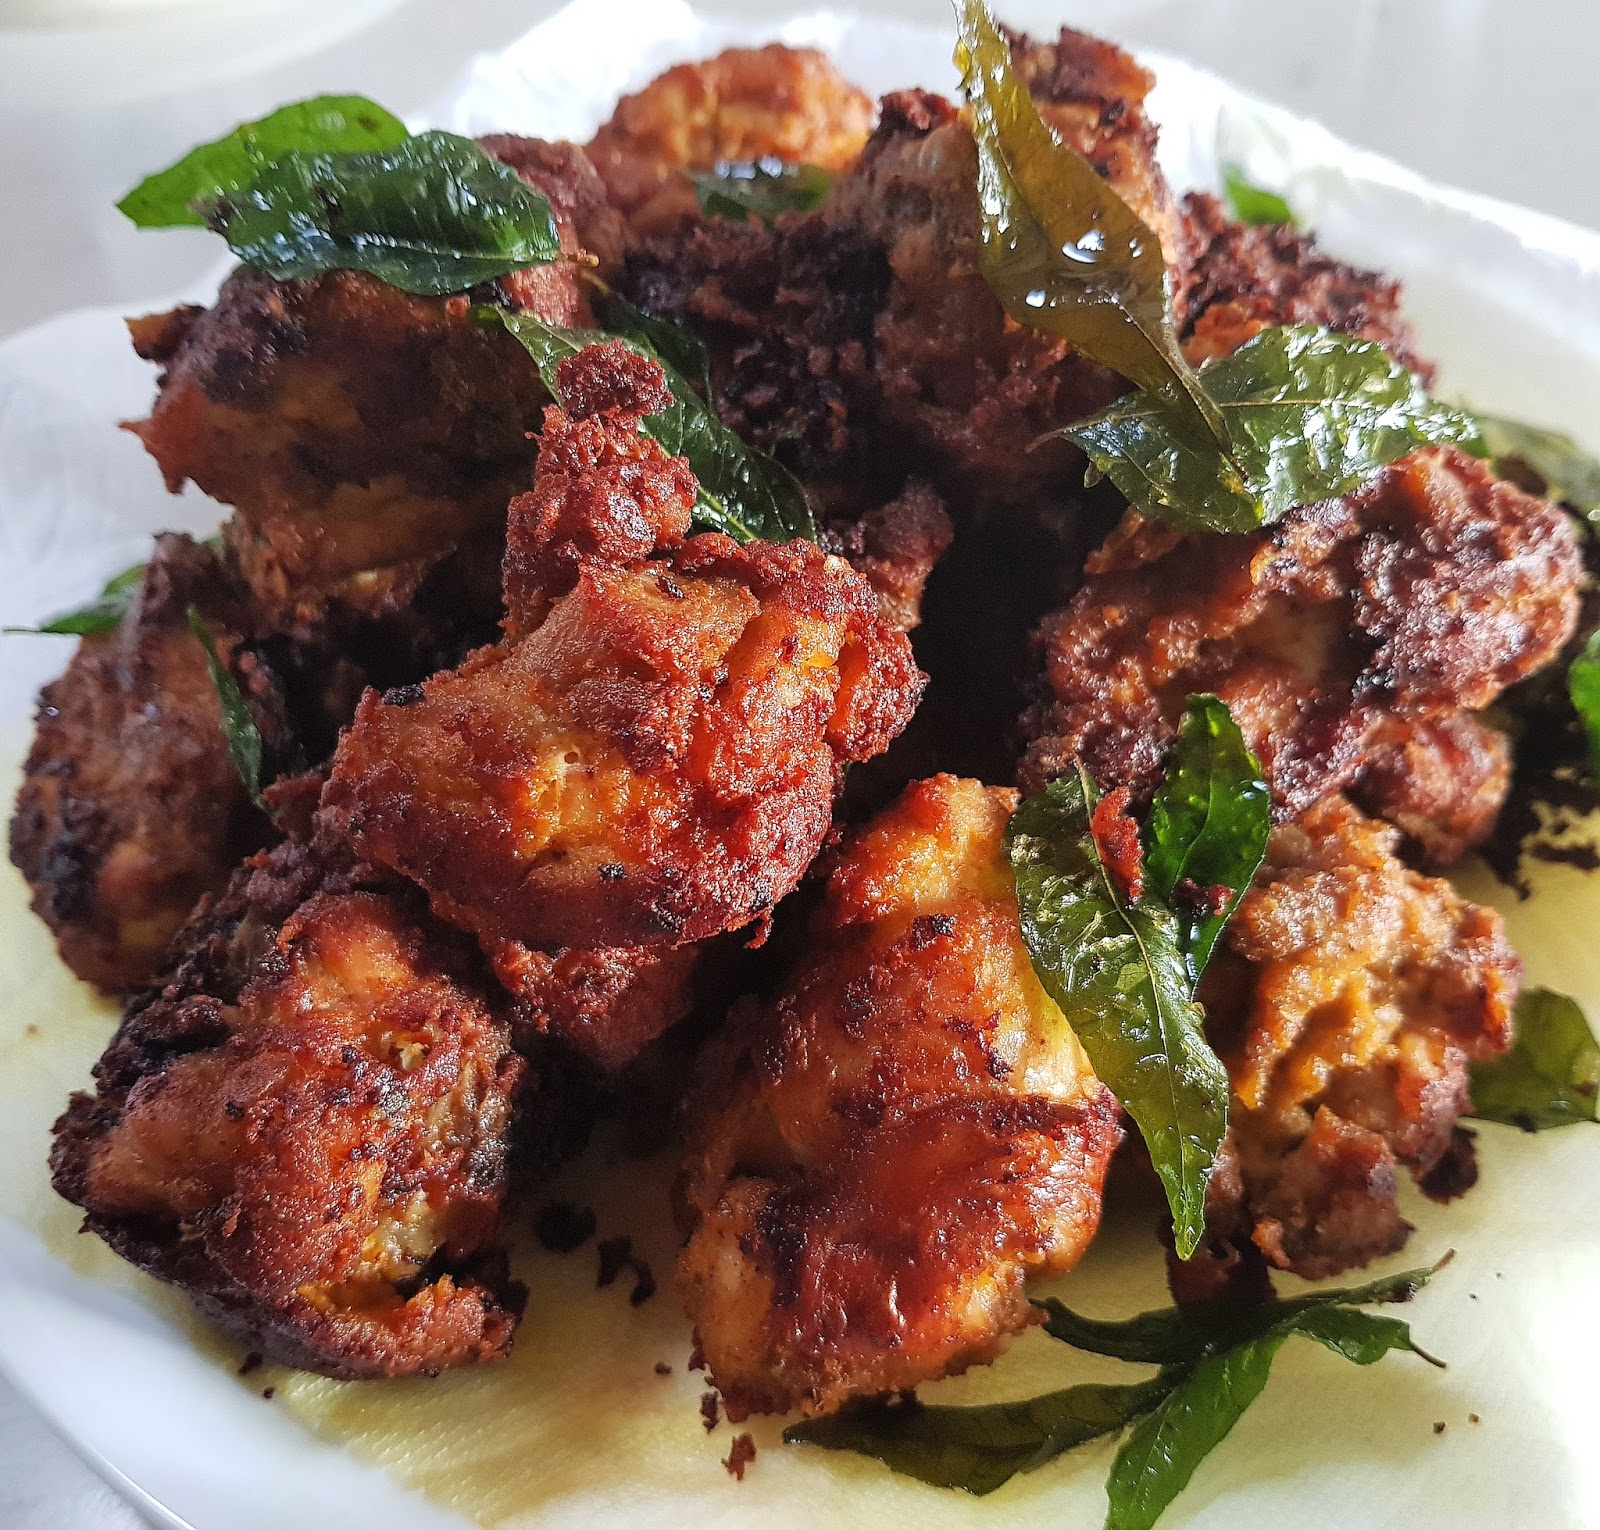 Flavour and Savour - The Food Lovers' blog: "Ayam Goreng Berempah" - Fried  Chicken with Spices